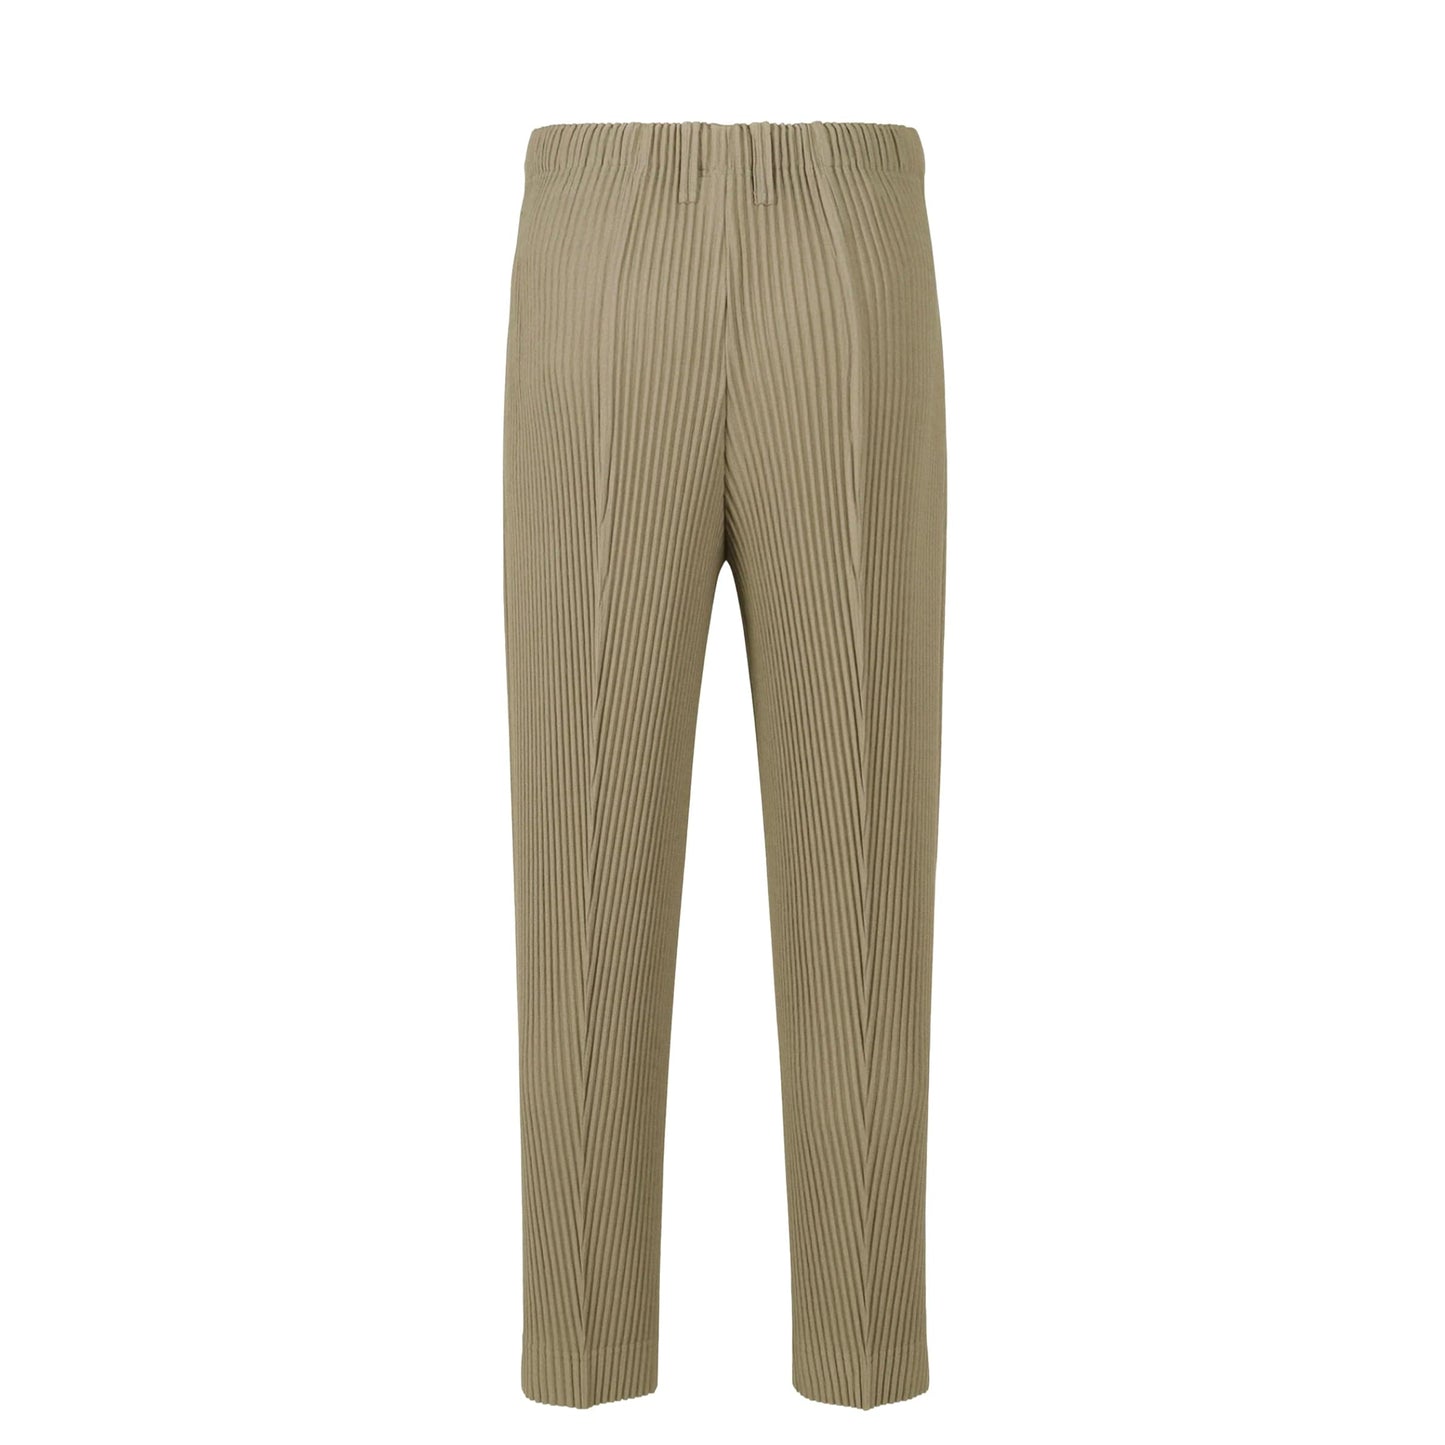 Homme Plissé Issey Miyake Pants COMPLEAT TROUSERS